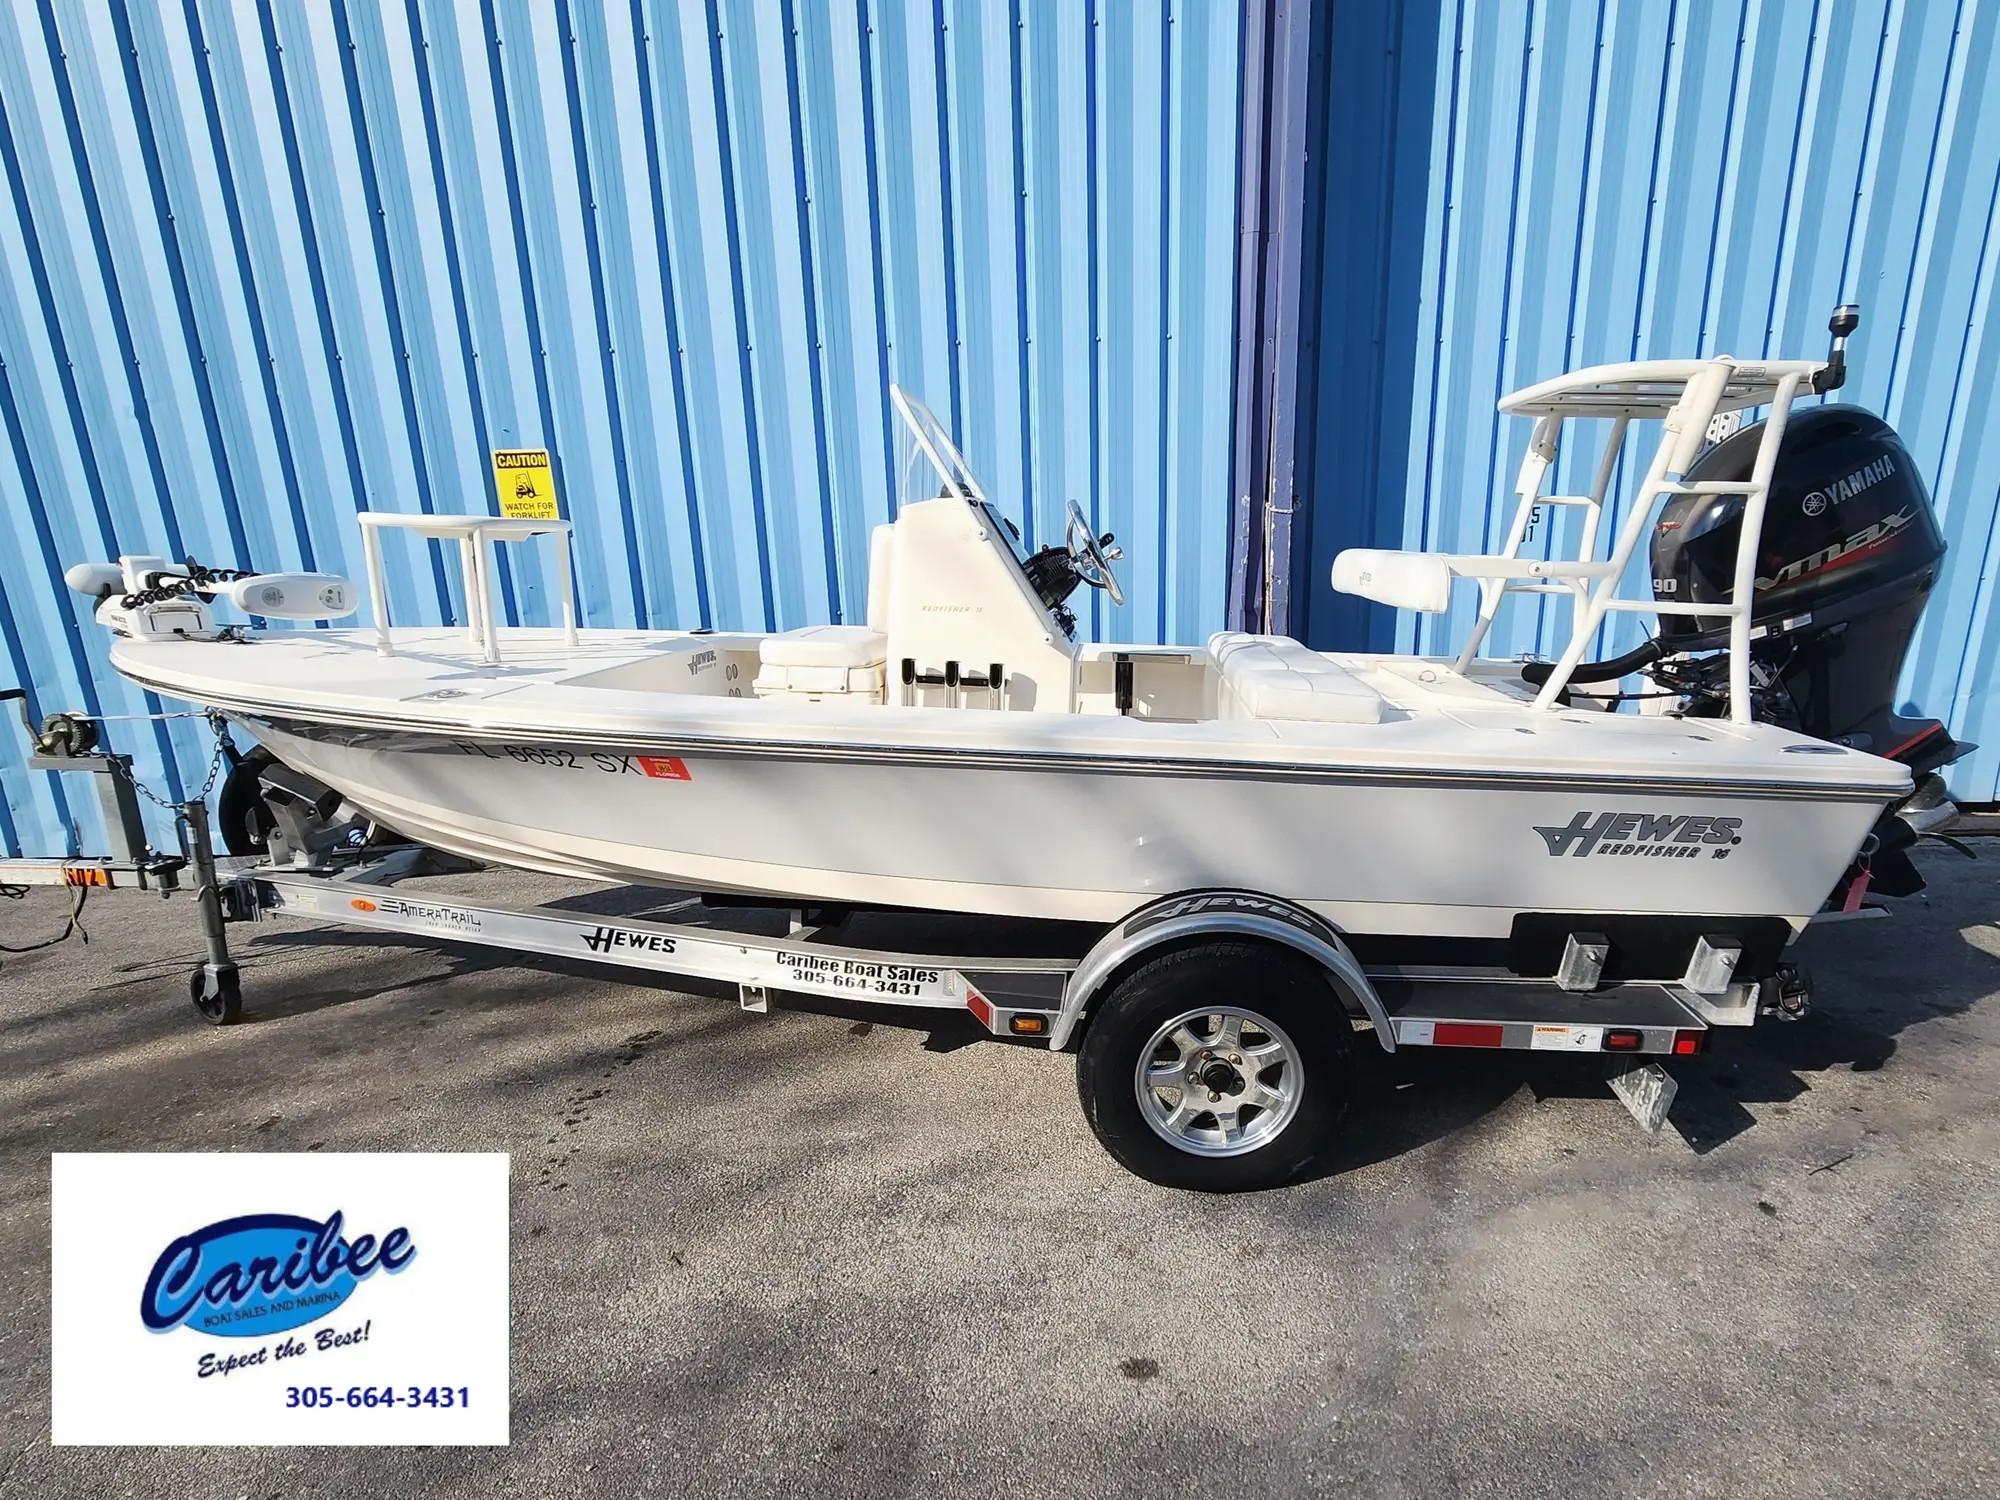 Page 58 of 250 - Used centre console boats for sale - boats.com